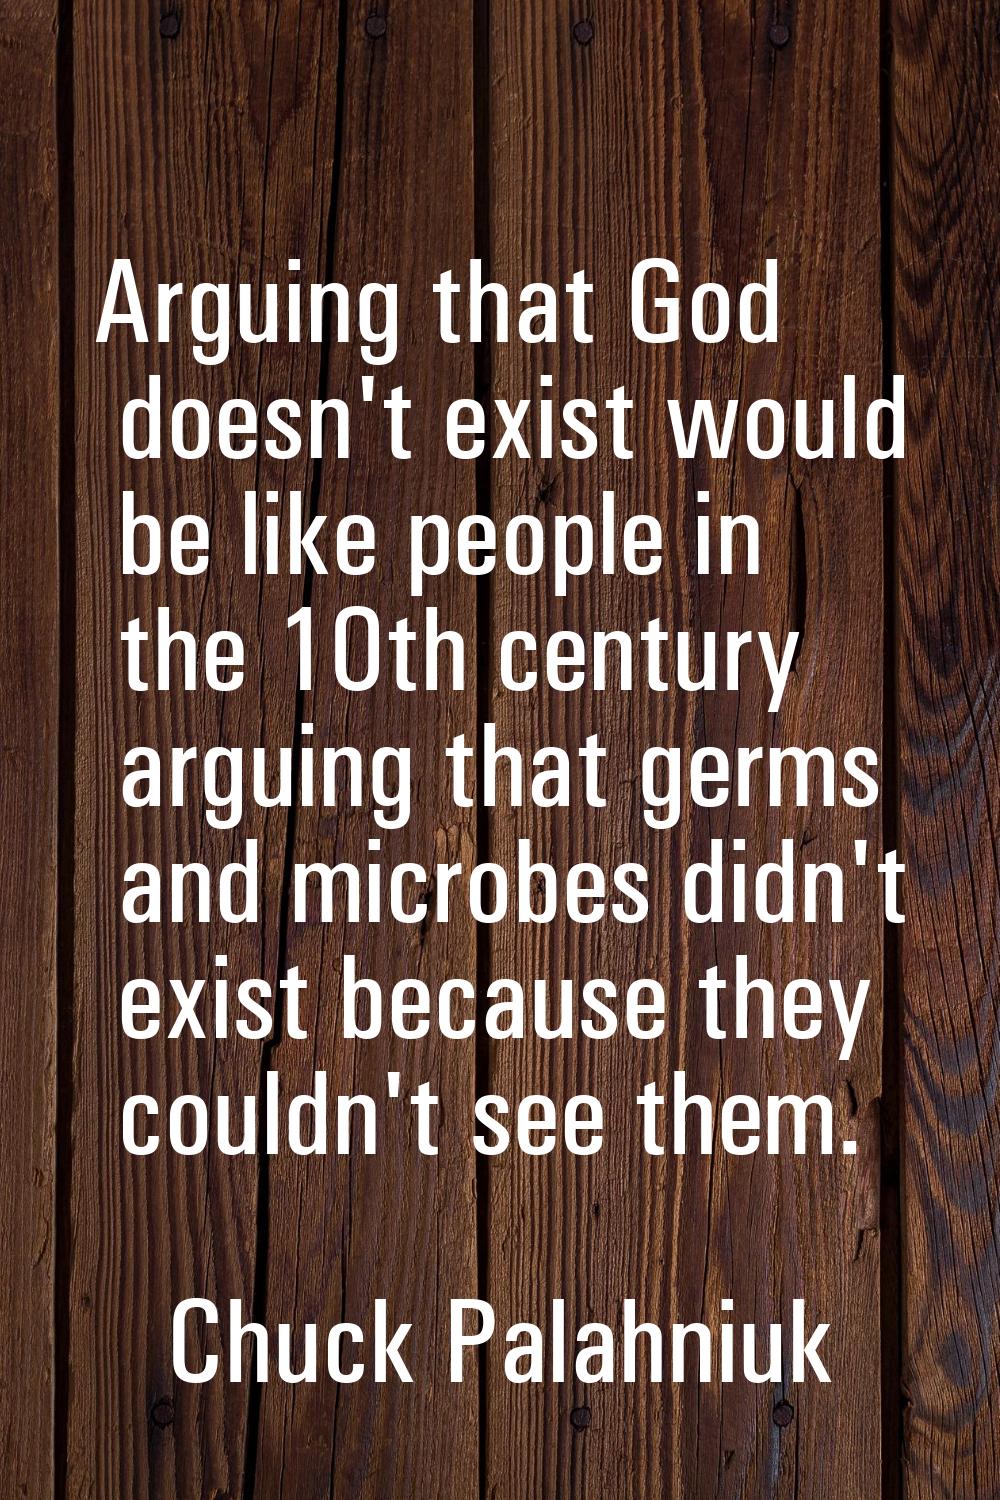 Arguing that God doesn't exist would be like people in the 10th century arguing that germs and micr